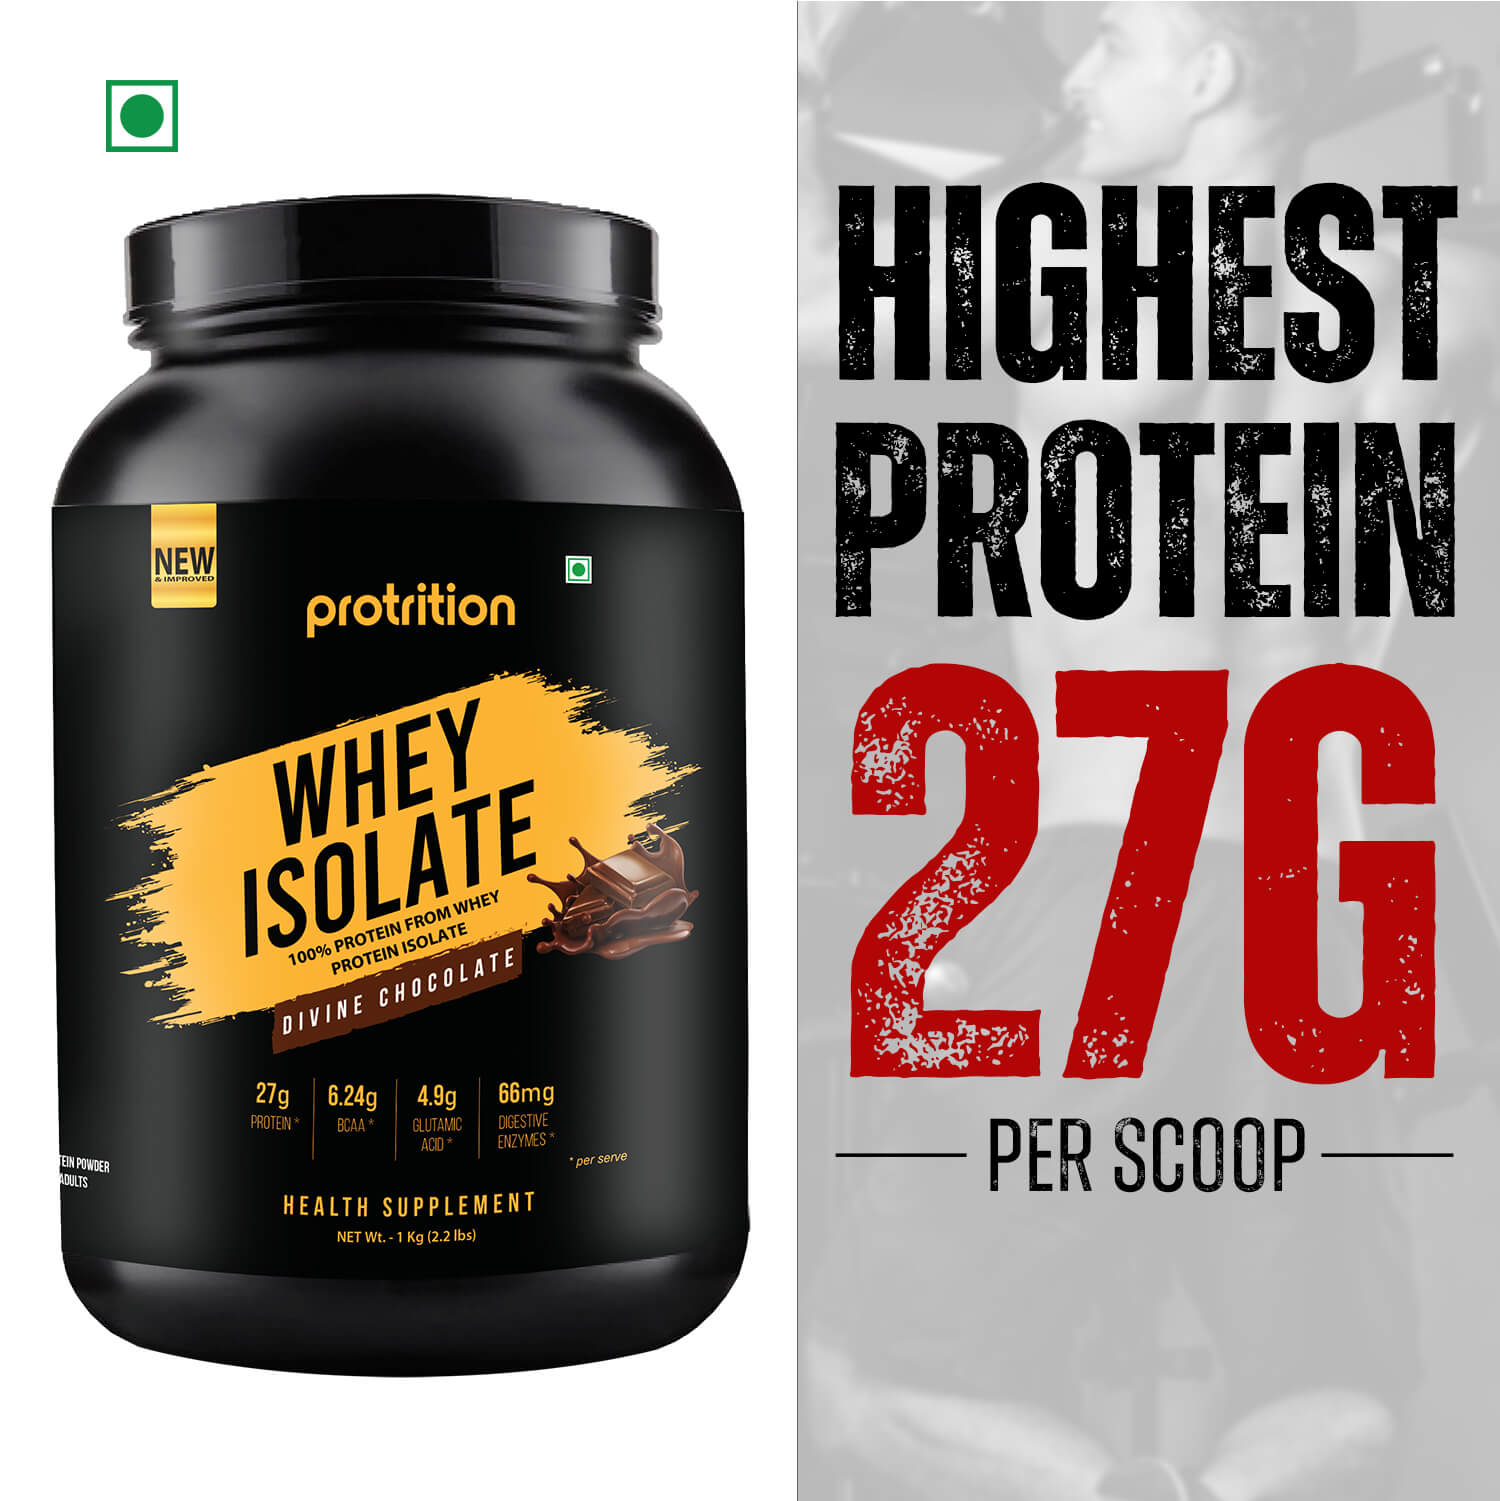 Protrition Whey Isolate, 1Kg, Divine Chocolate